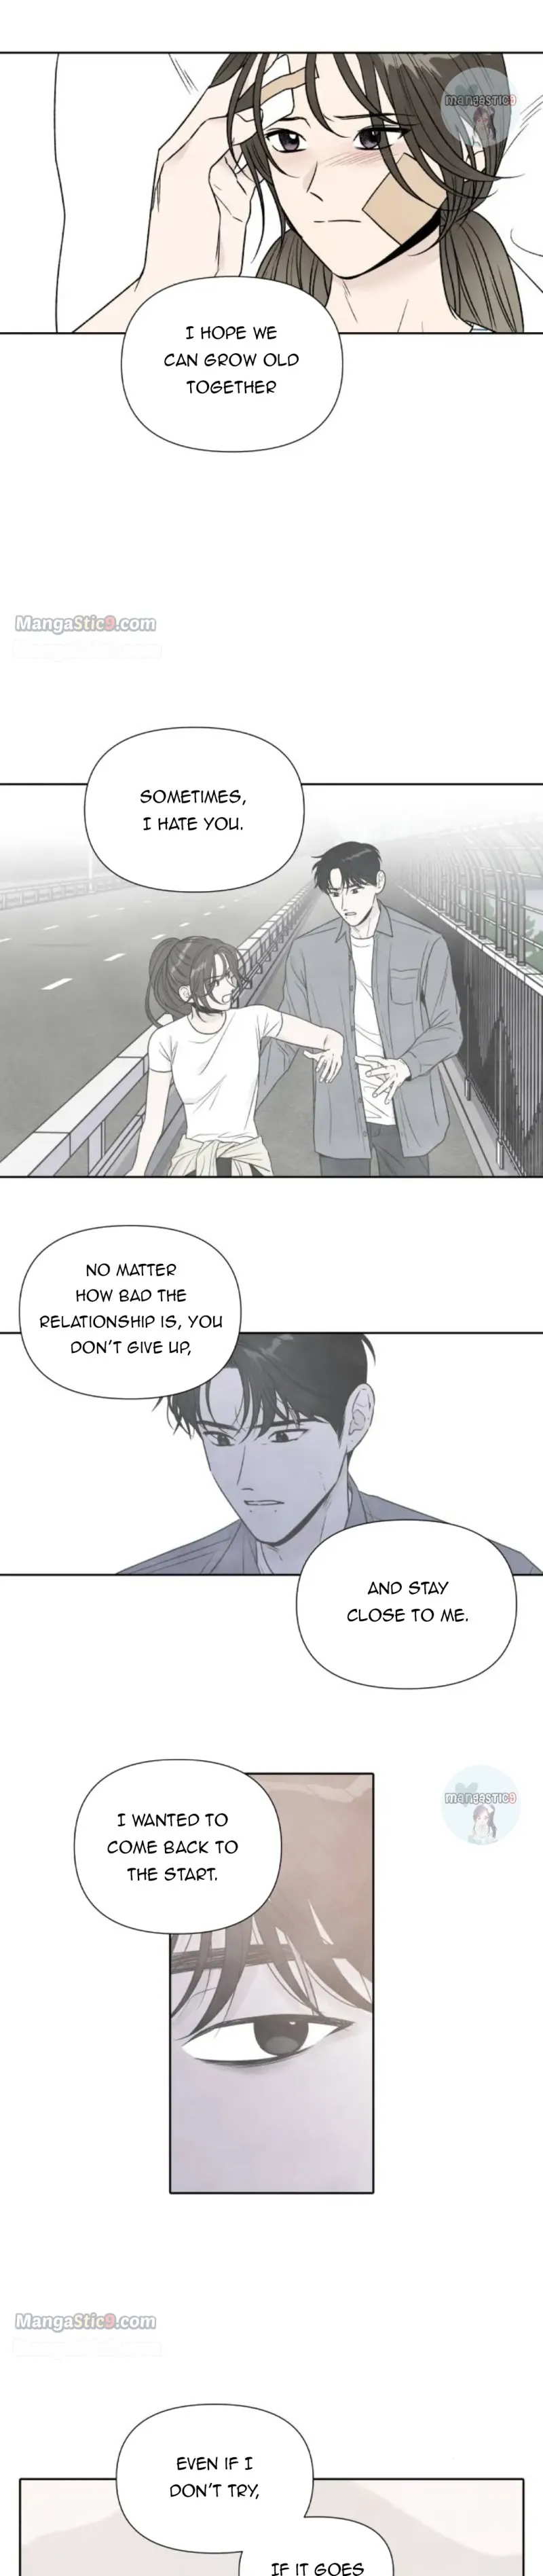 My Reason to Die  - page 2